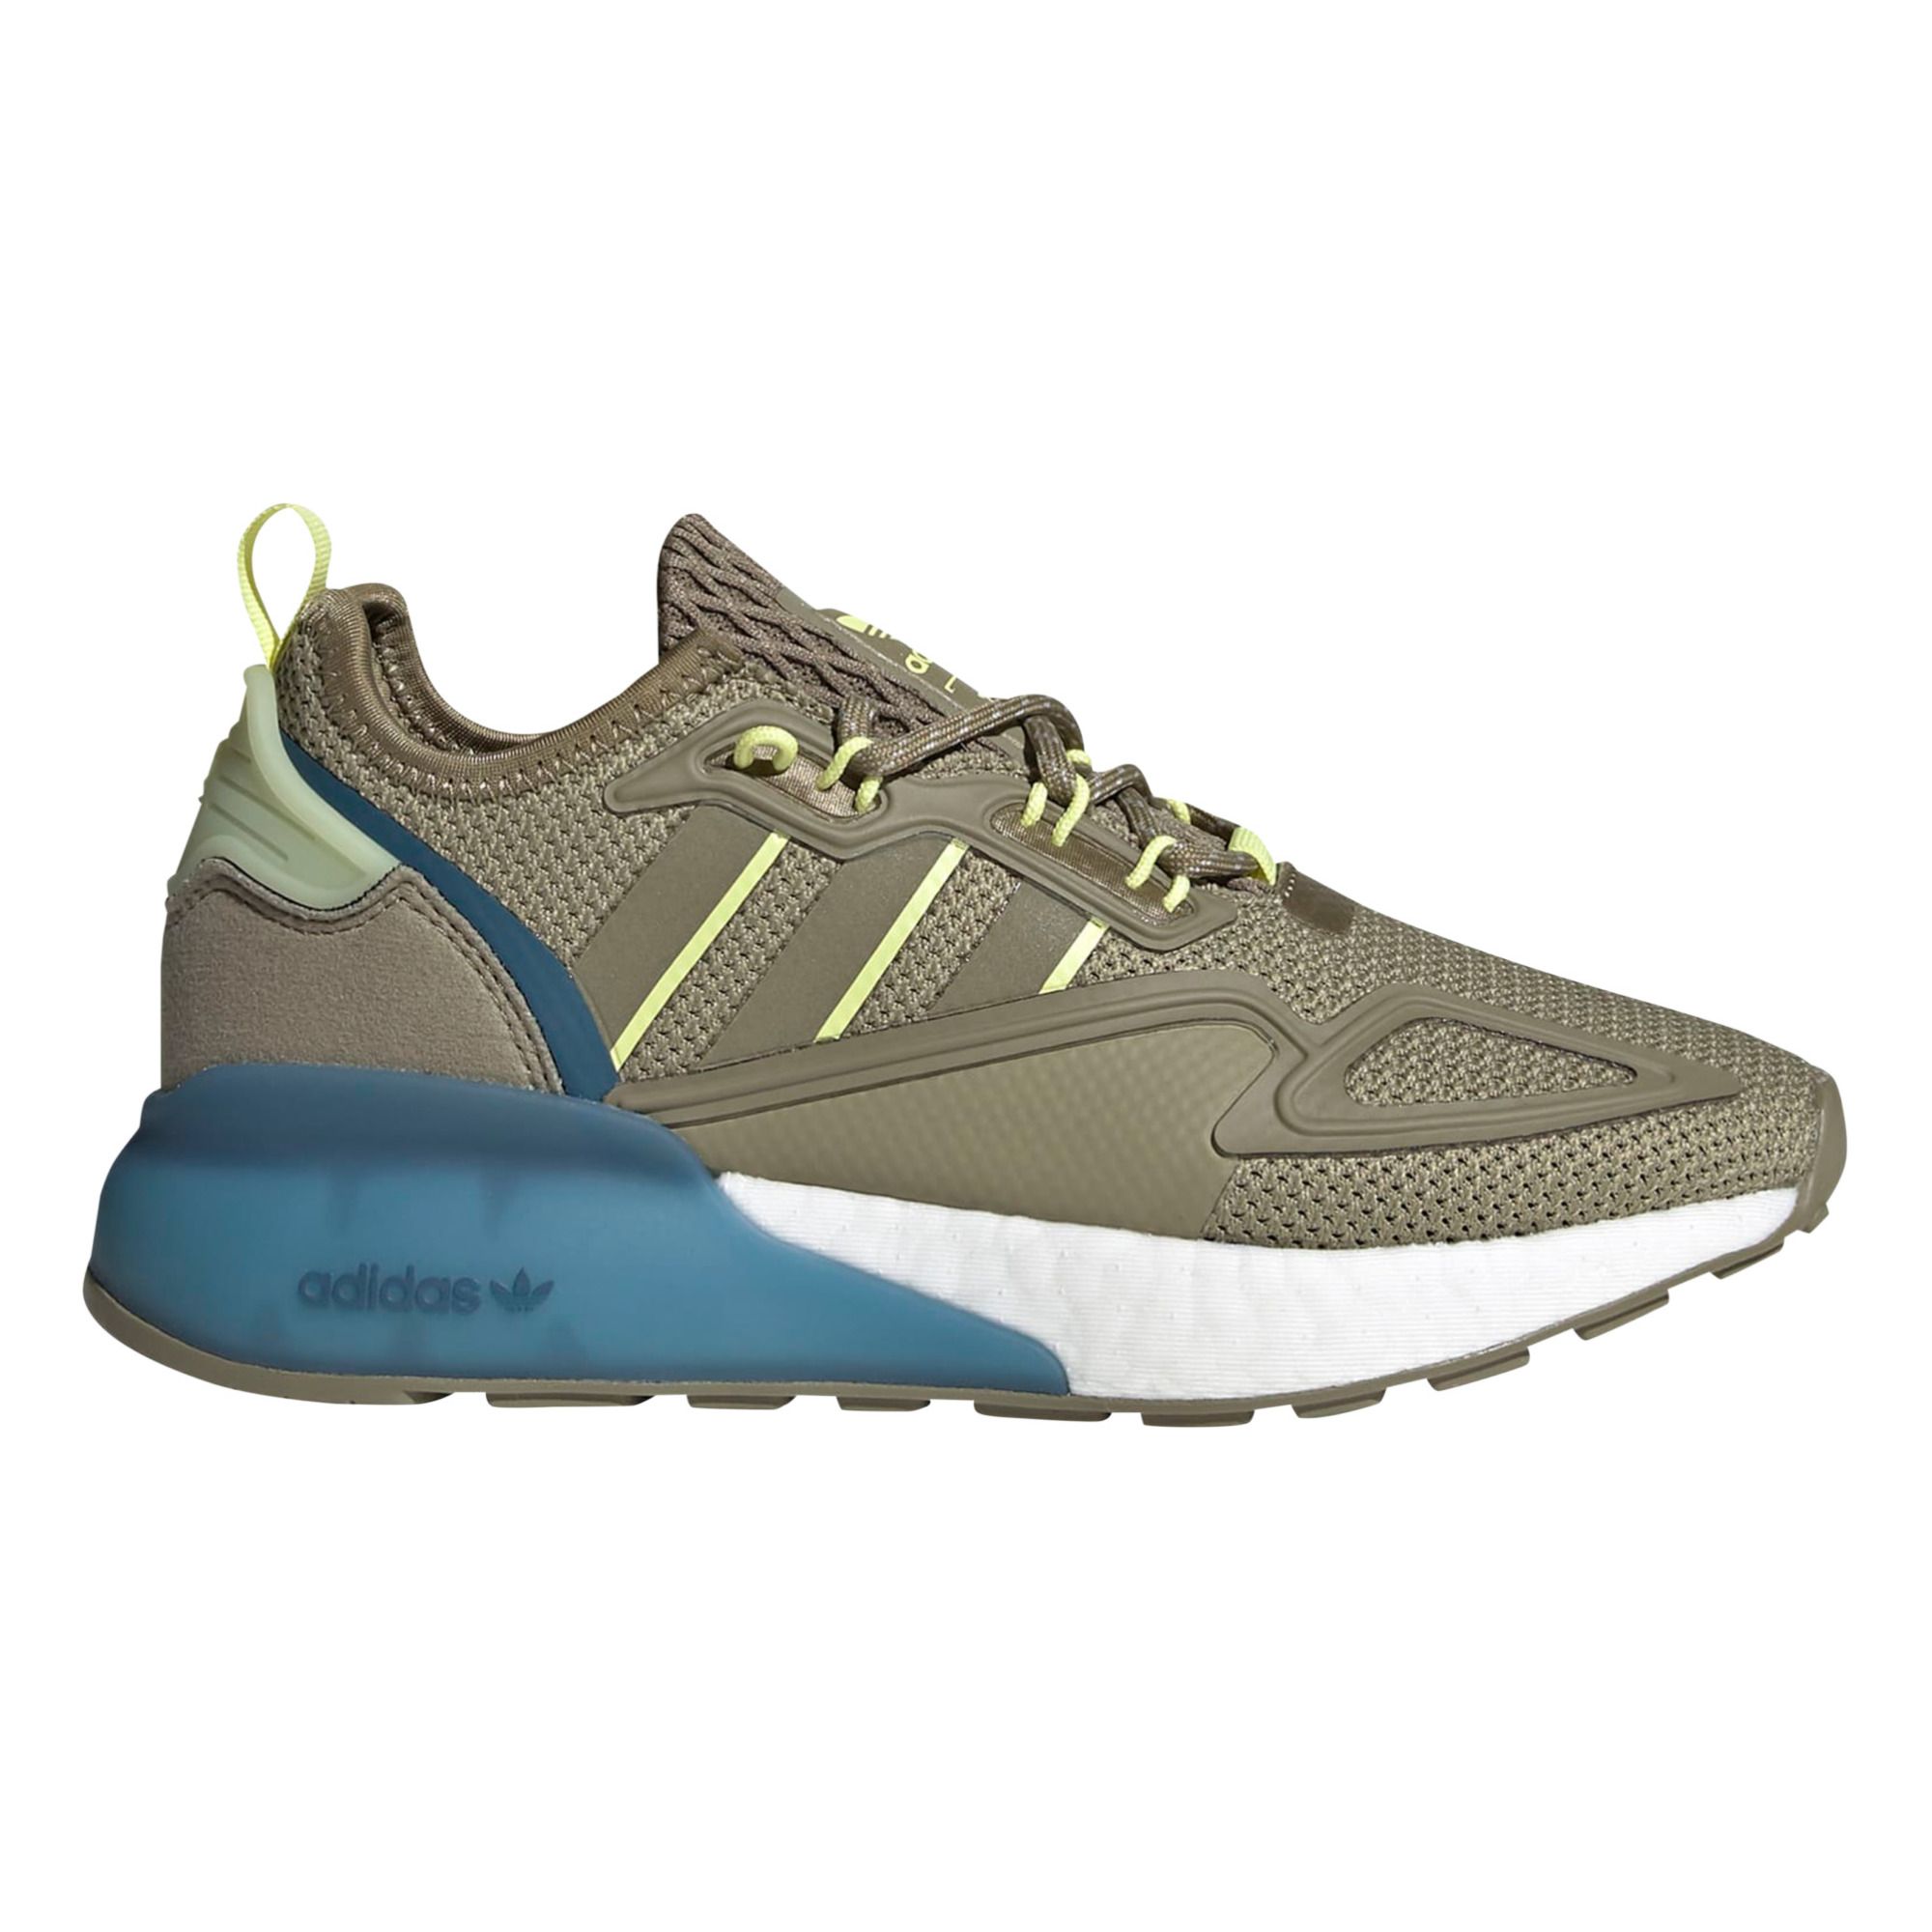 Adidas - Baskets Lacets ZX 2K Boost - Fille - Vert olive